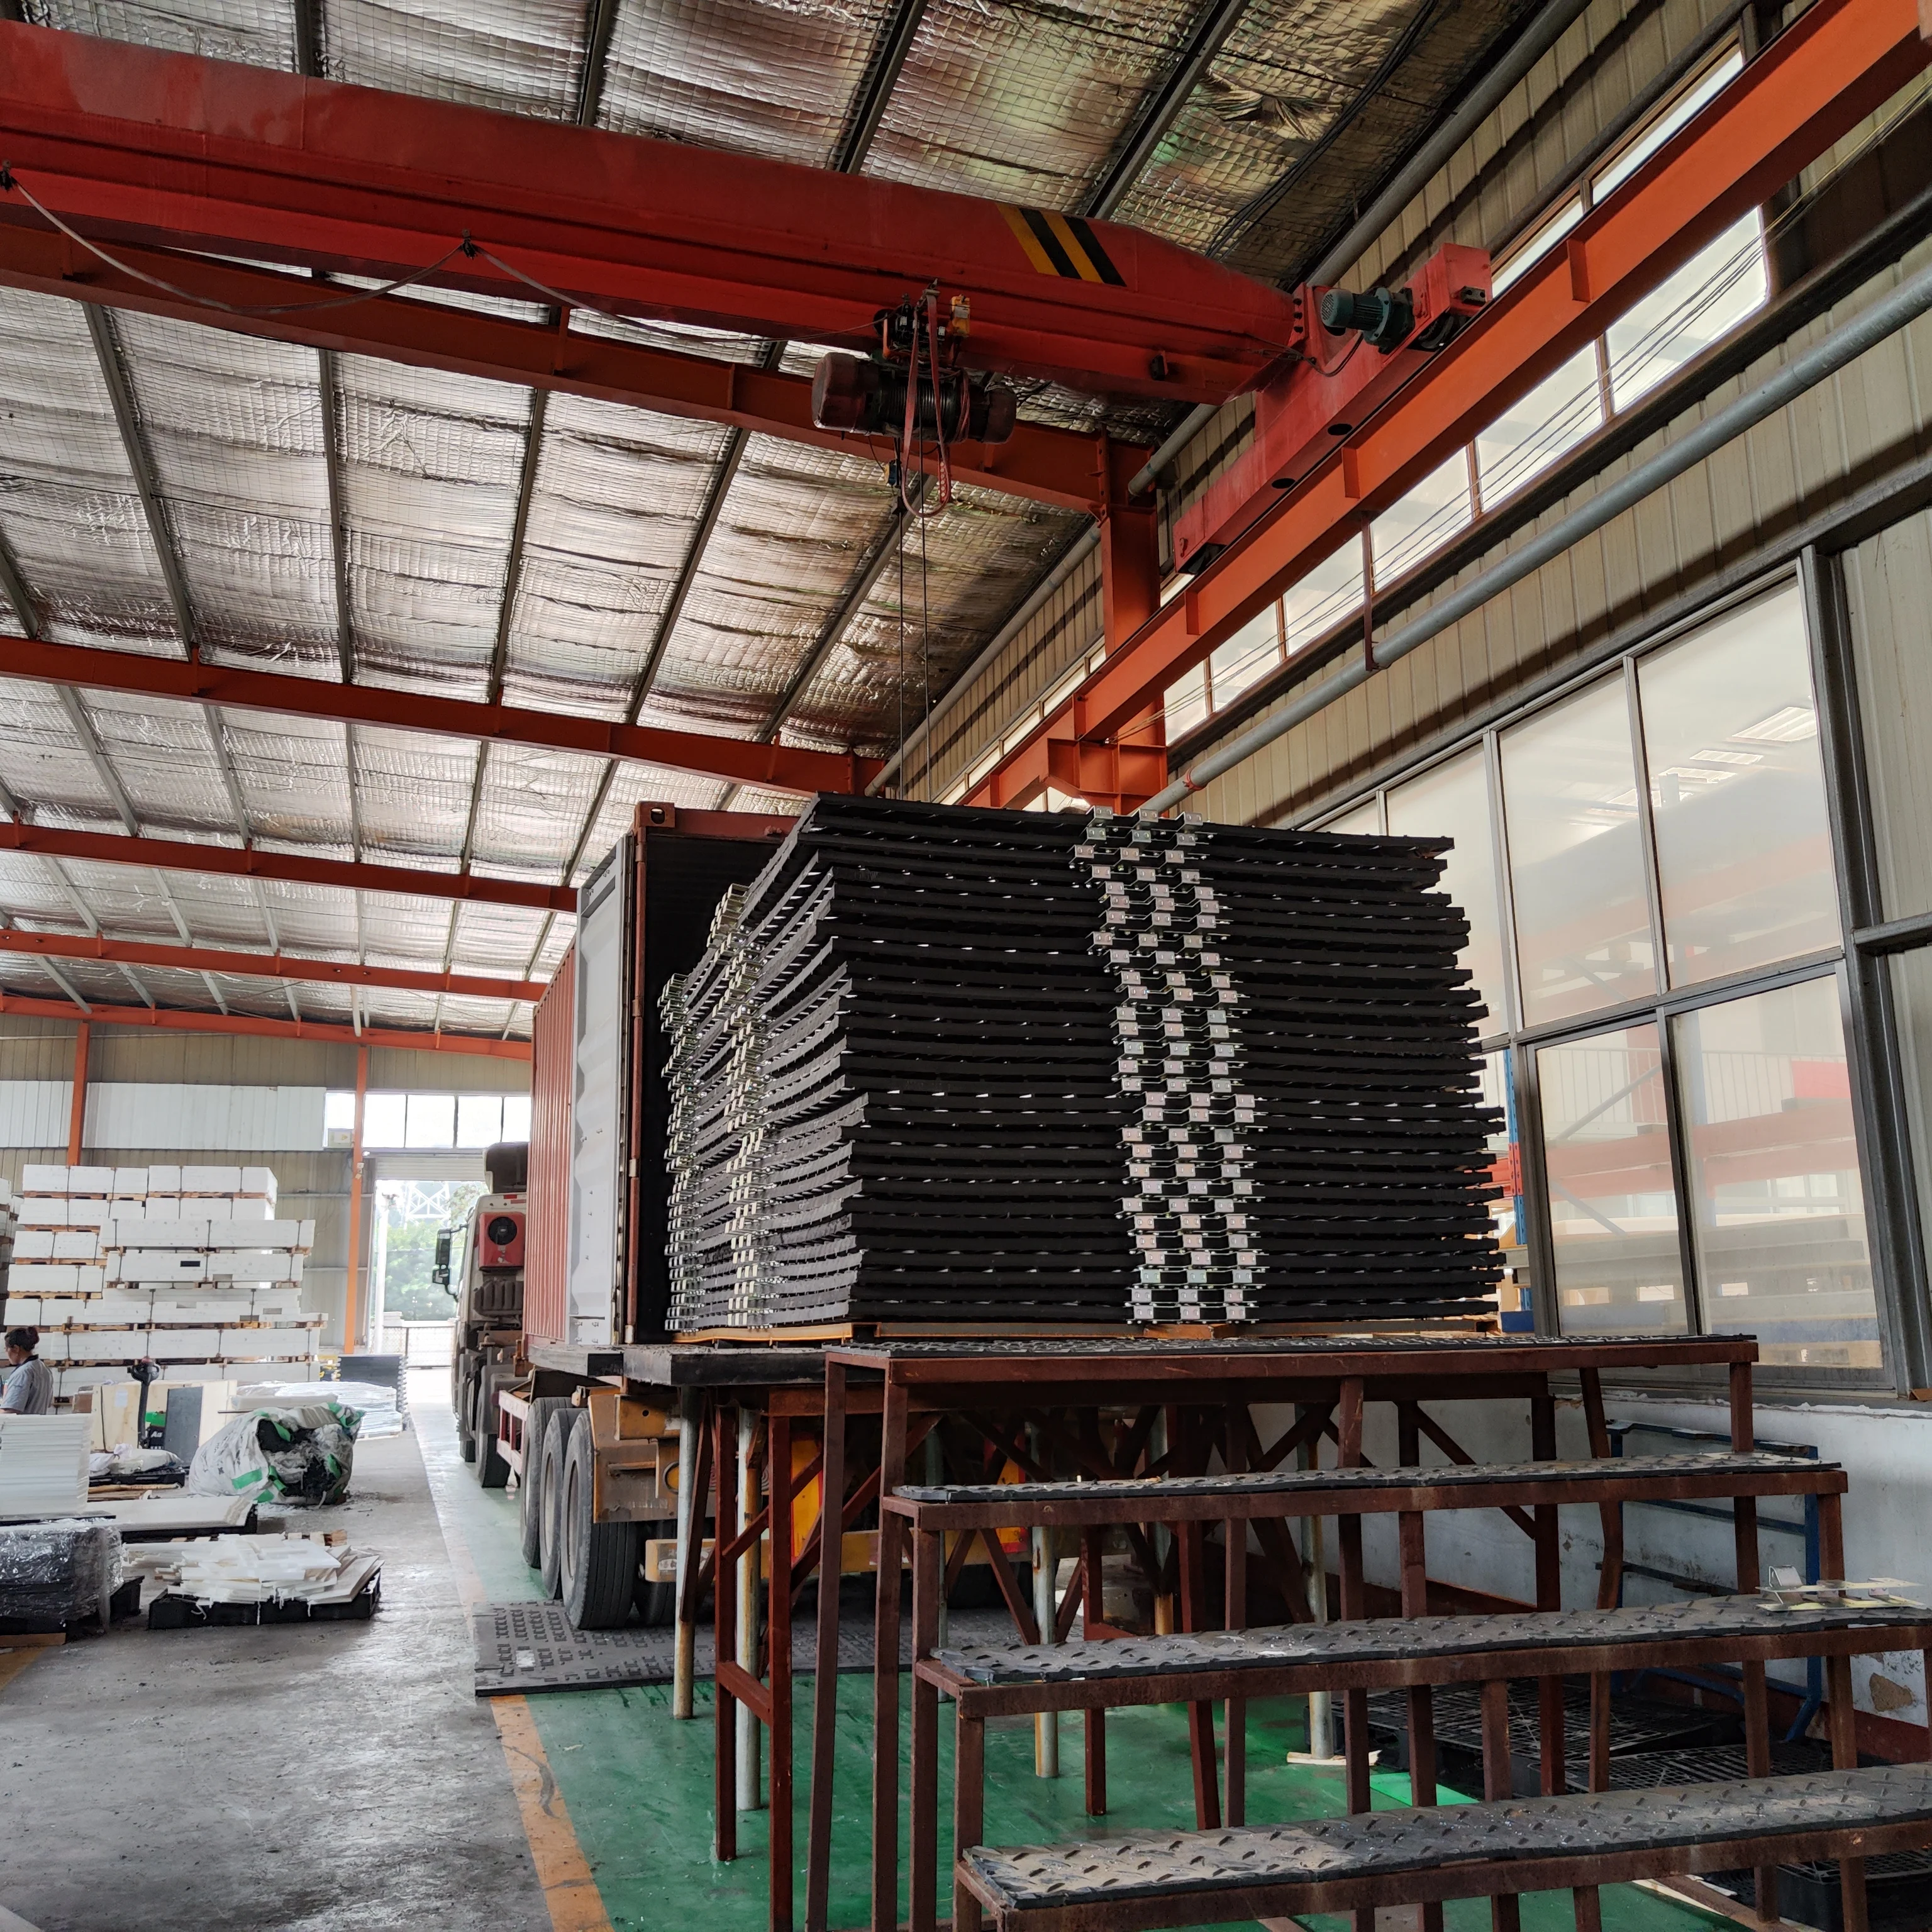 HDPE Extruded board bog mat track mat road way system durable antslip HDPE temporary road mats